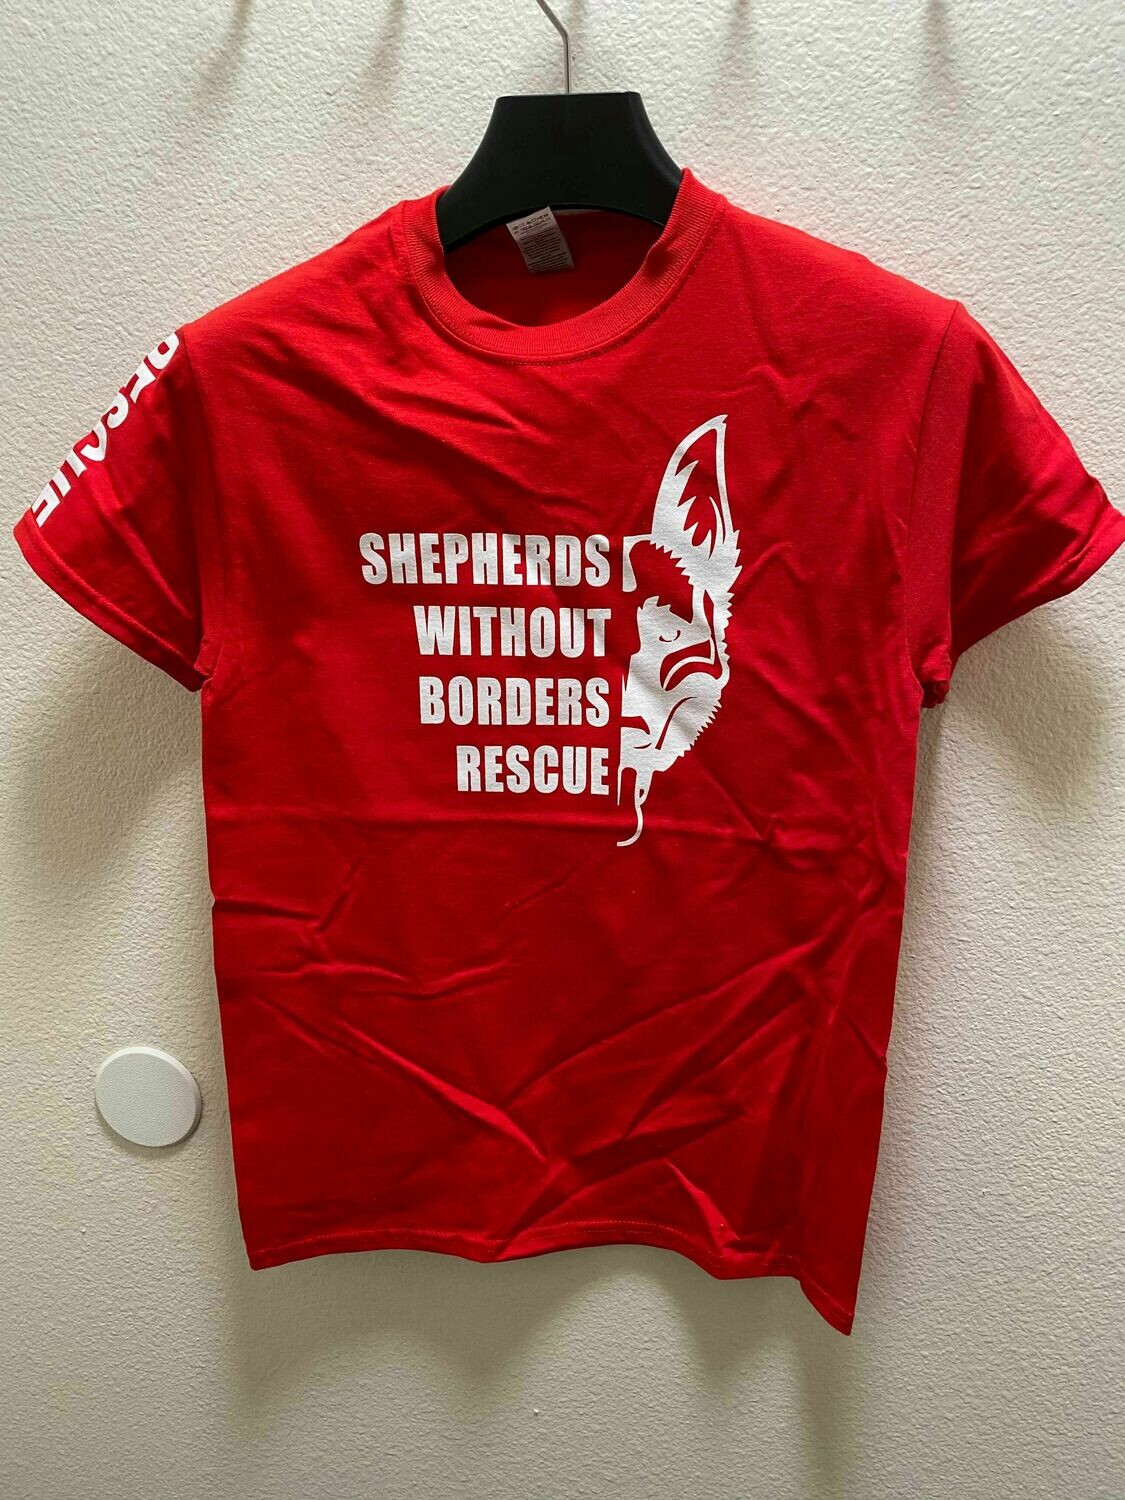 SWB Supporter Crew-Neck Shirt (Red) - 3XL